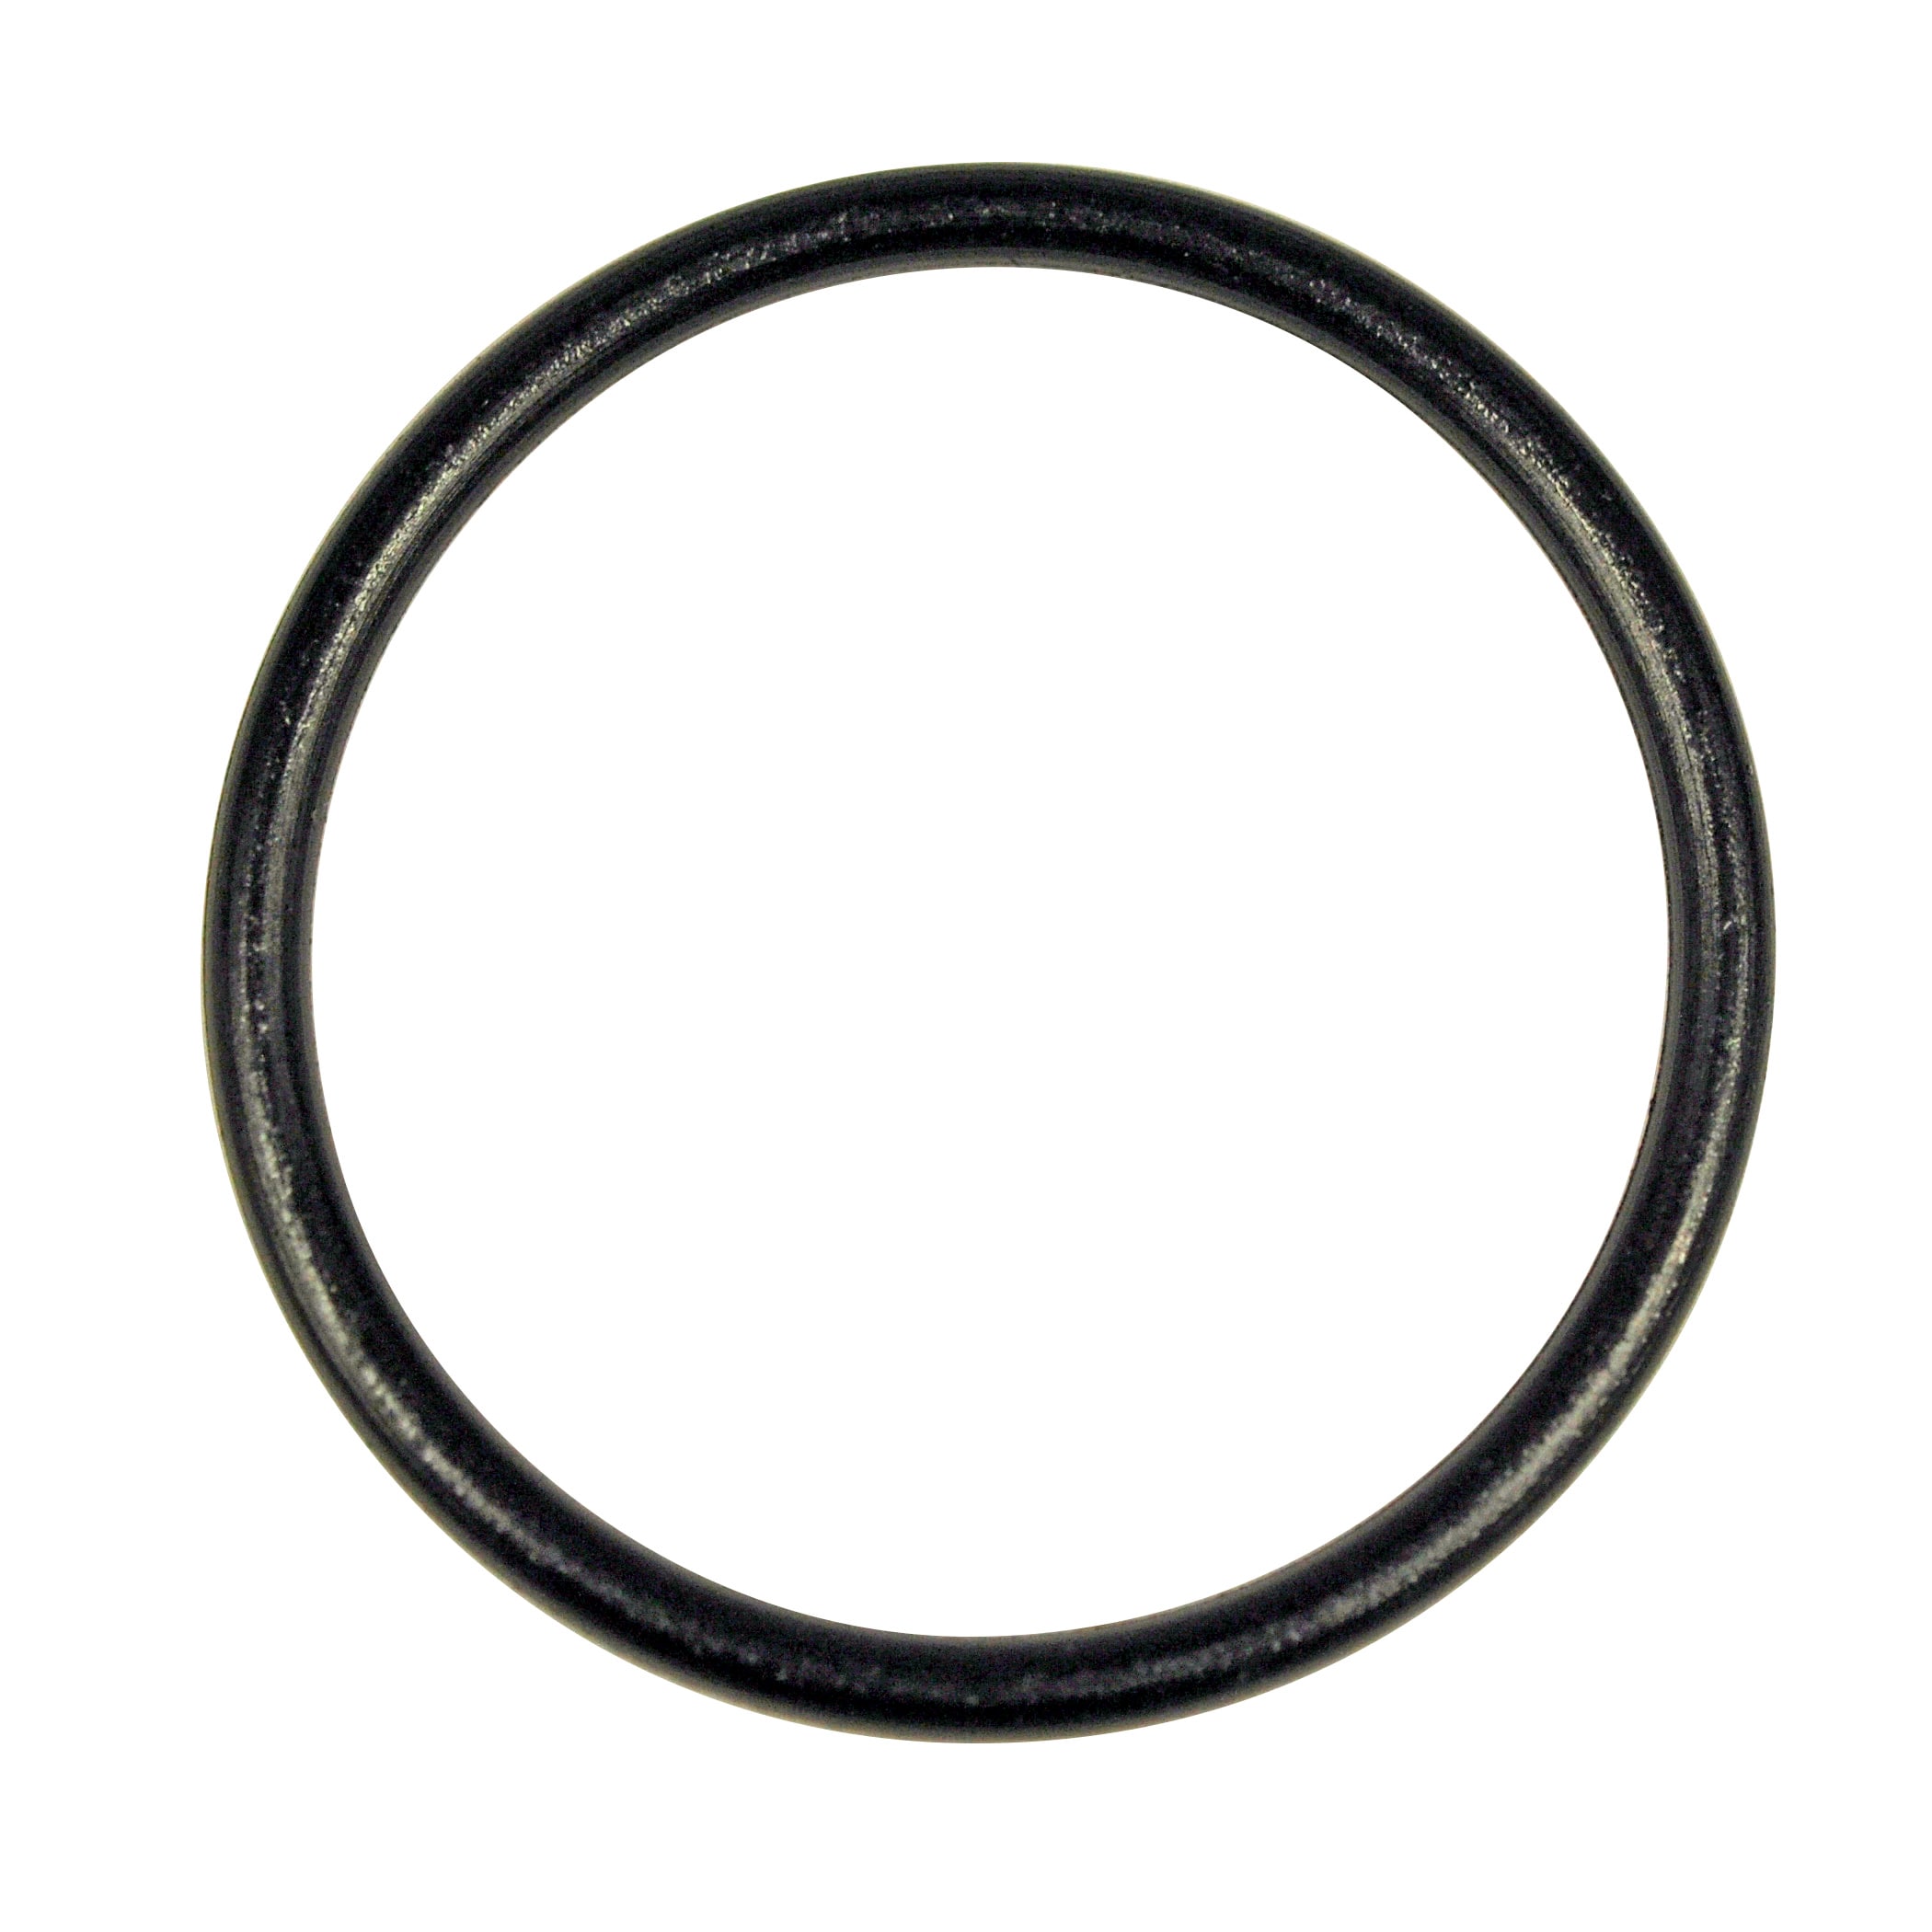 O-RING 15/16" X 13/16" X 1/16" PACK OF 10 